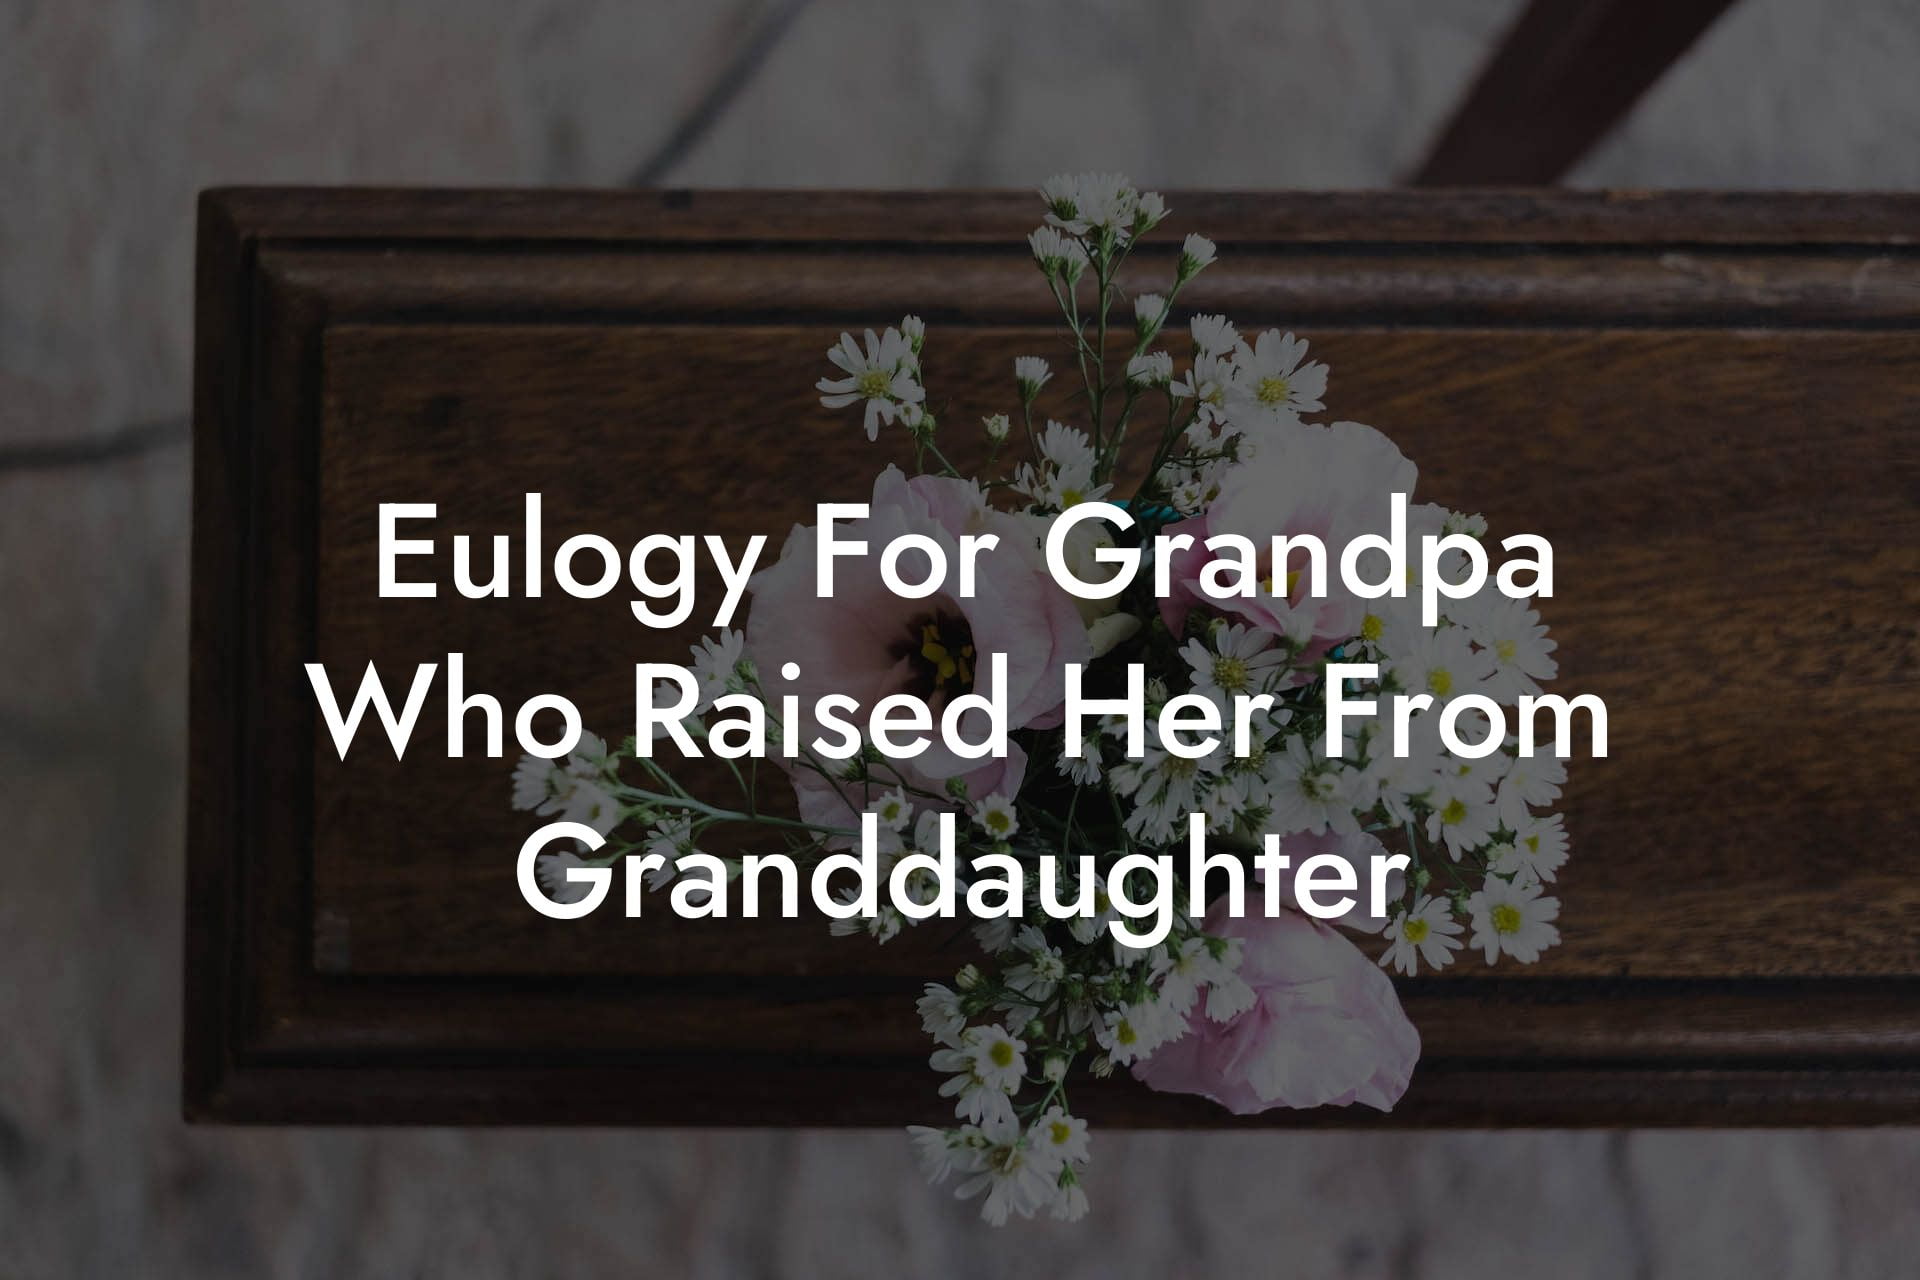 Eulogy For Grandpa Who Raised Her From Granddaughter